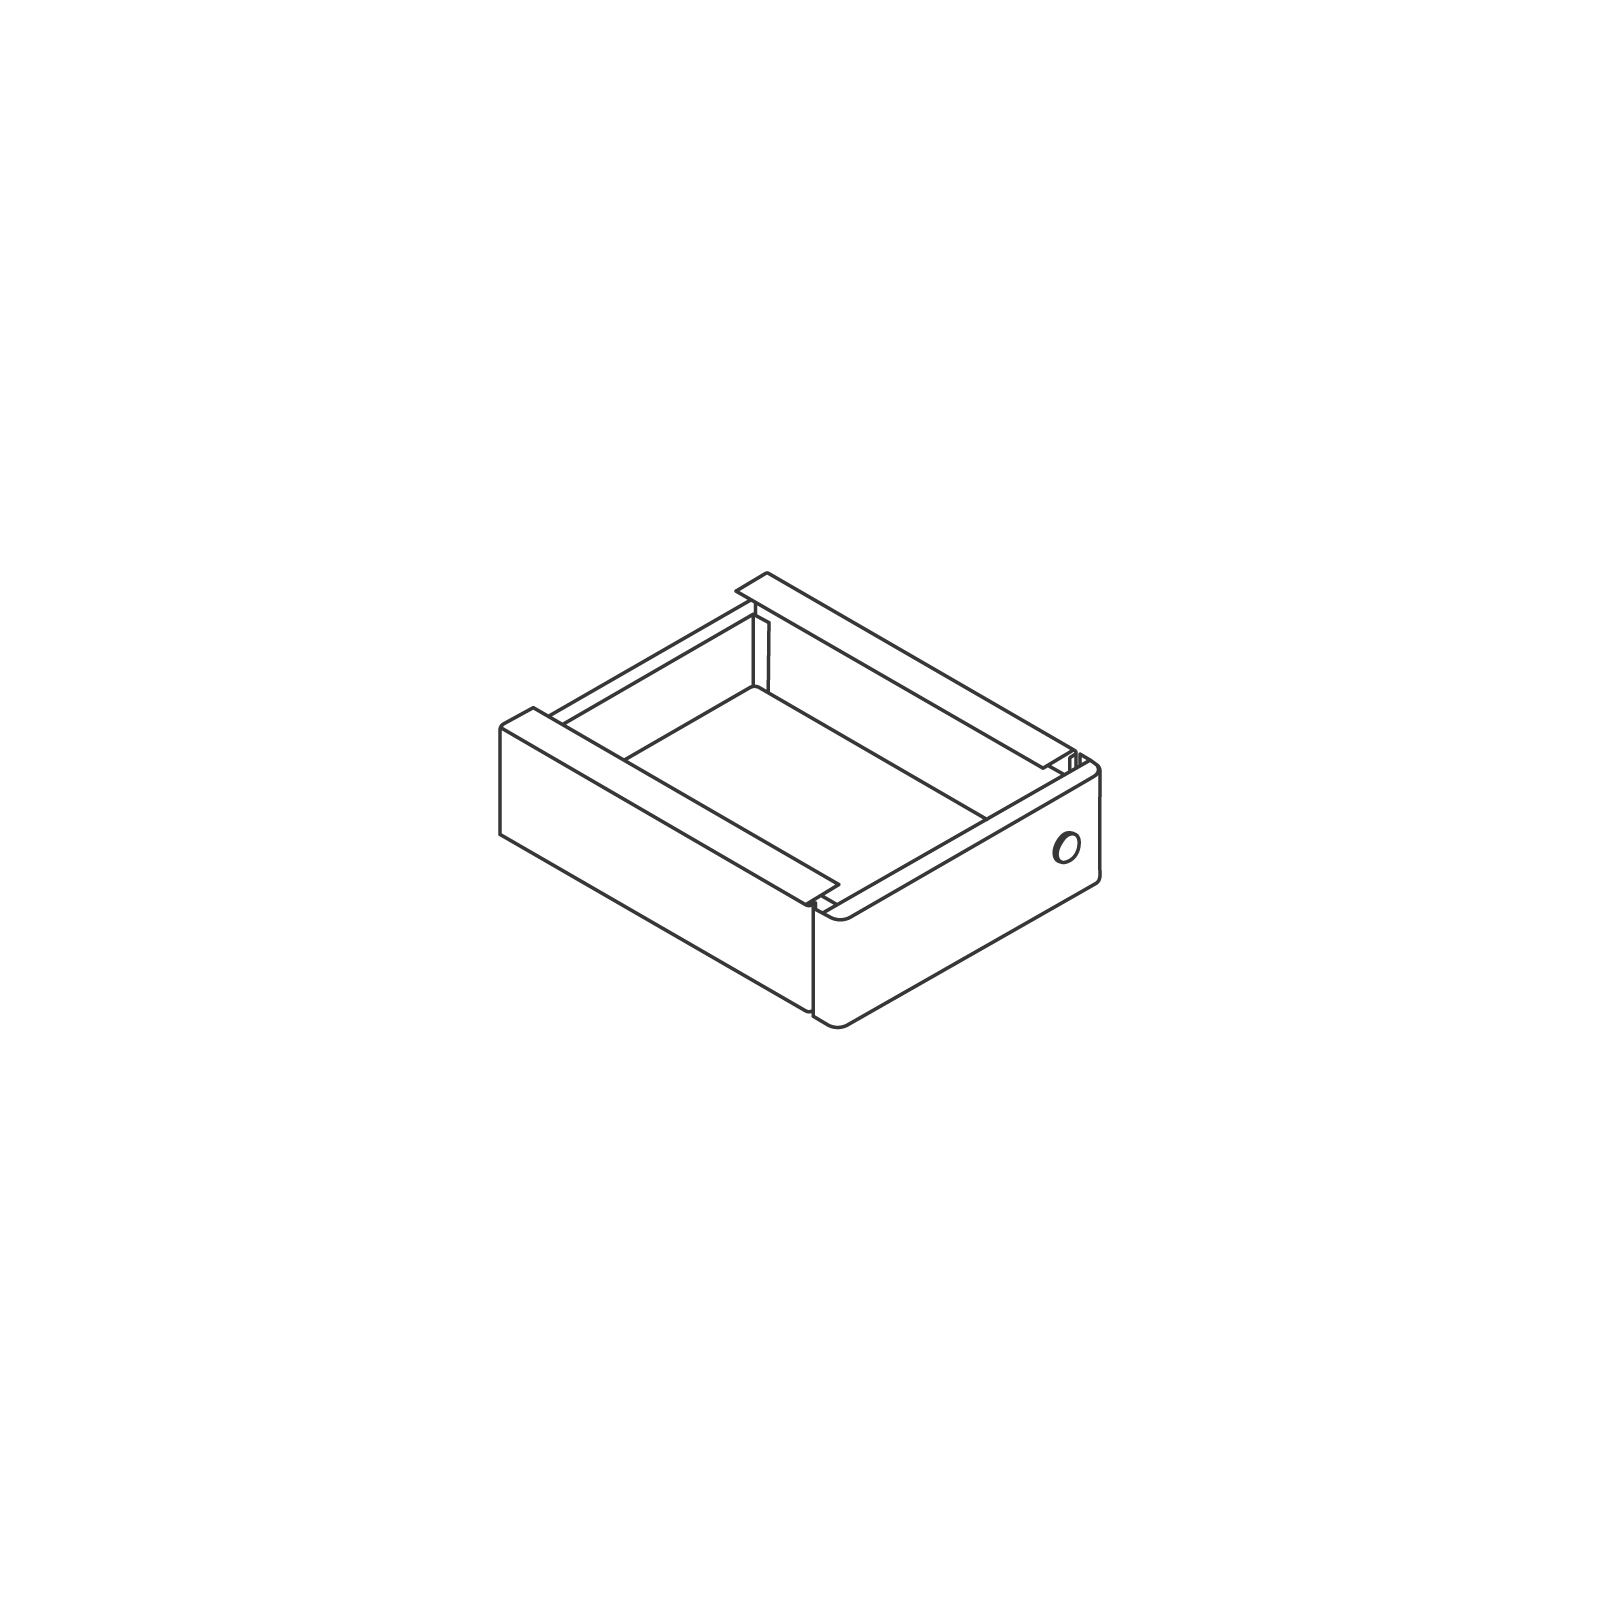 A line drawing - Ambit Small Suspended Storage